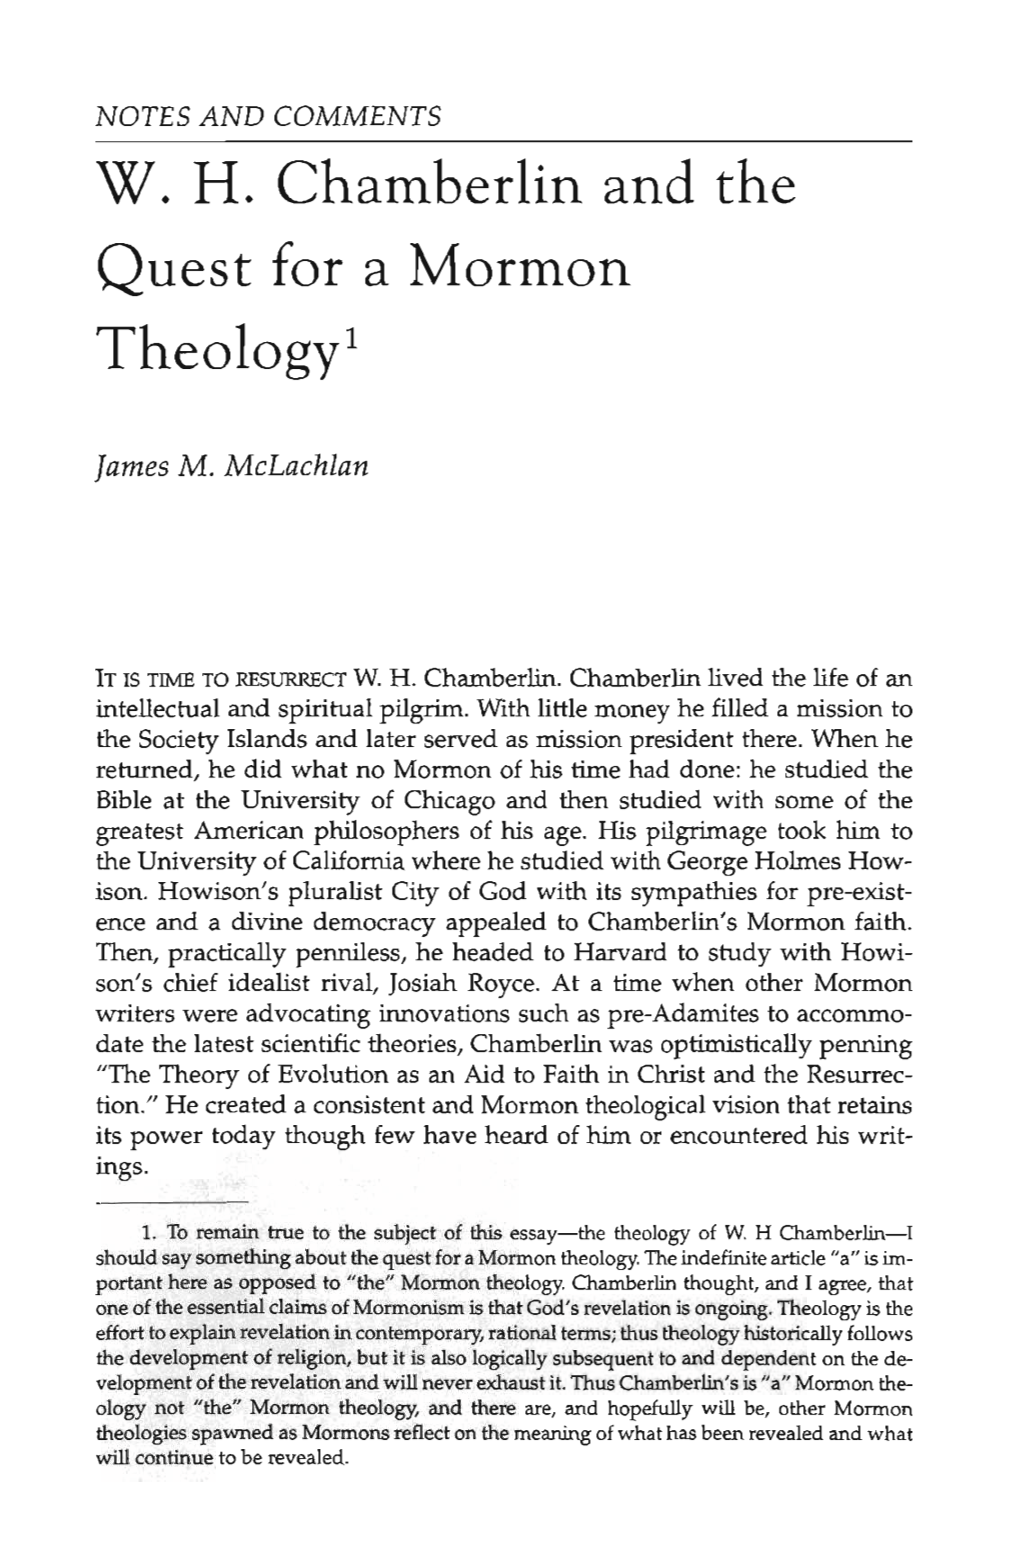 W. H- Chamberlin and the Quest for a Mormon Theology1